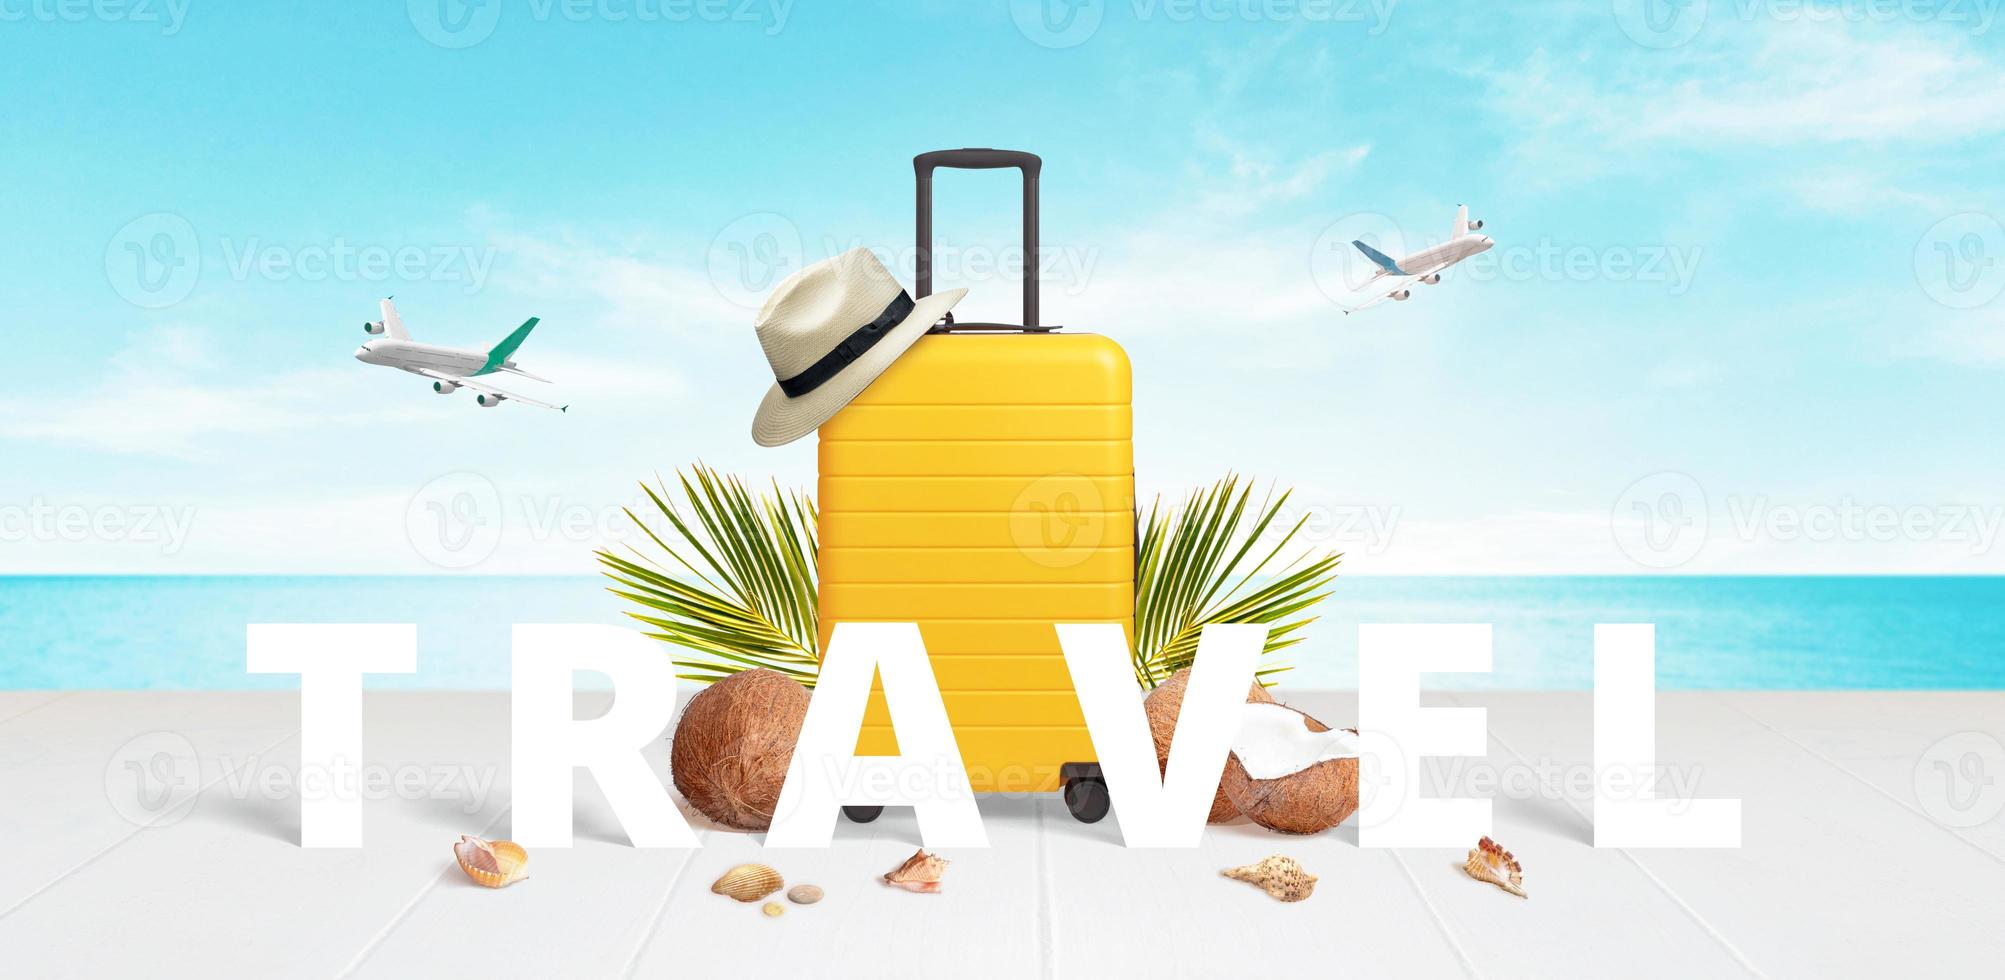 Travel yellow suitcase on the beach surrounded by travel text, coconuts, hat, palm leaves and shells. Planes in the sky. Travel concept. photo